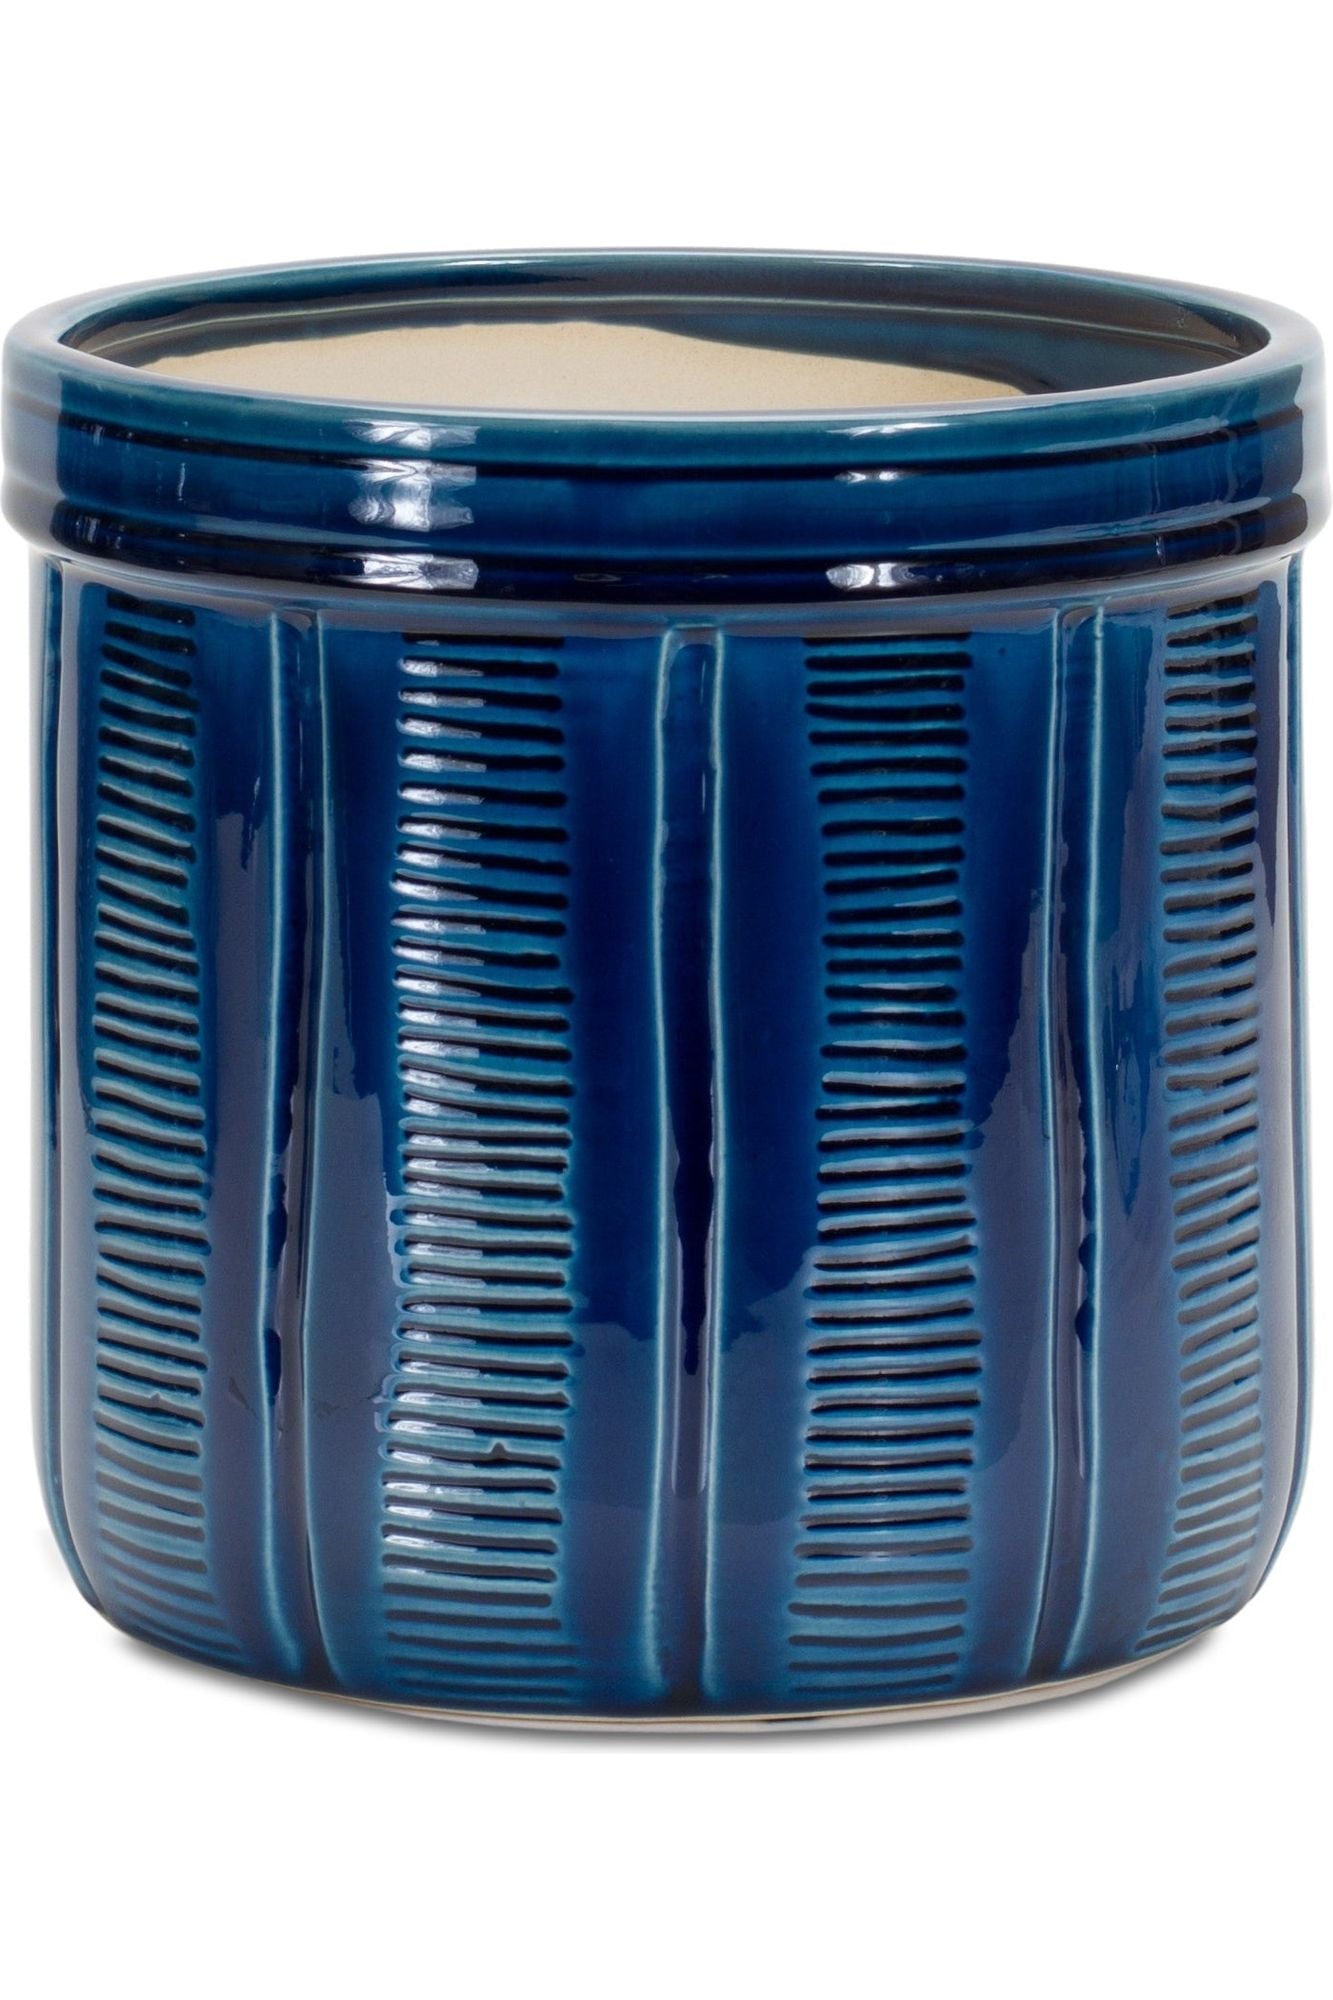 Shop For 7.25" Blue Abstract Planter Pots (Set of 3) 85261